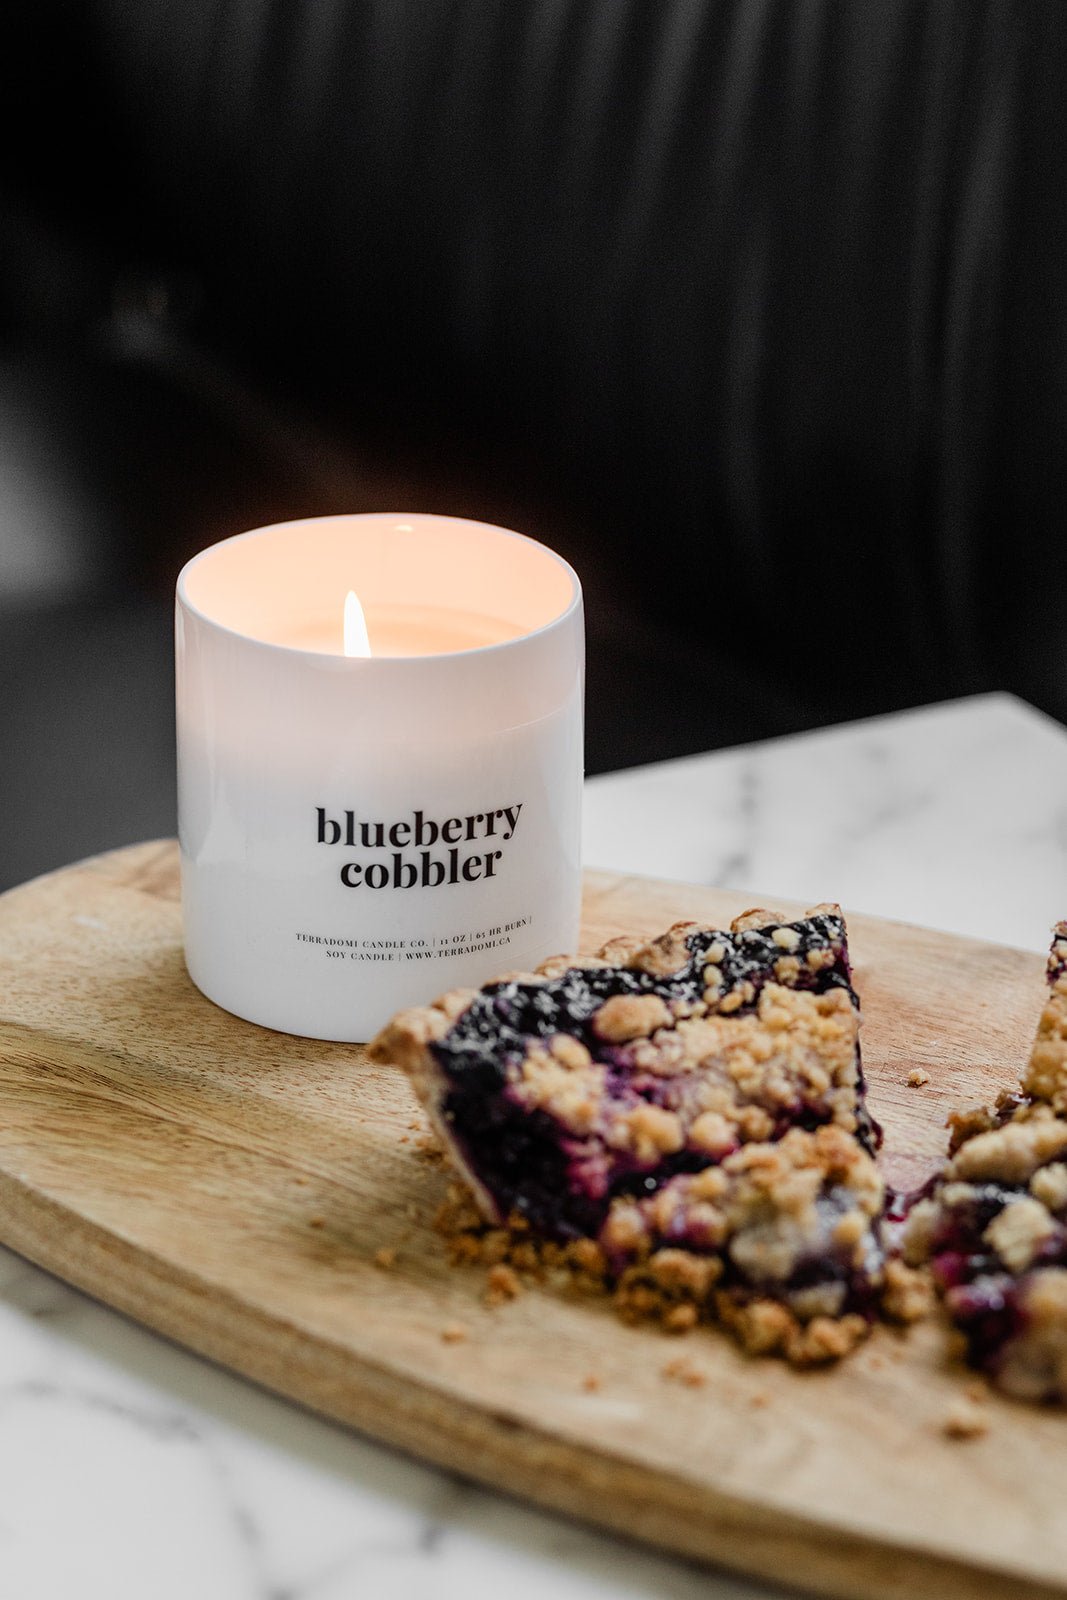 blueberry cobbler scented candle